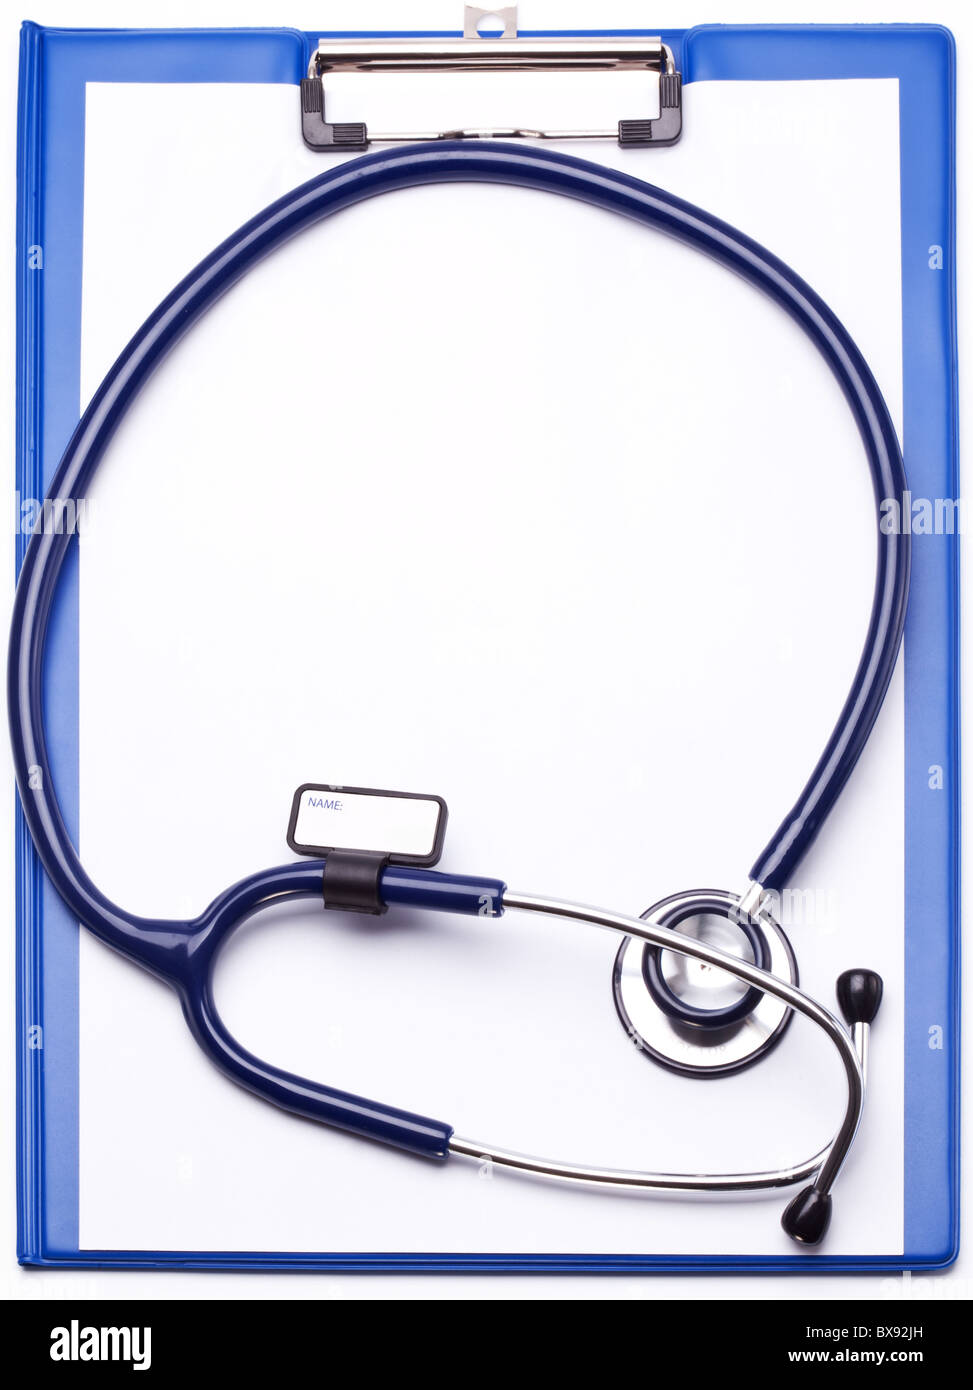 Medical stethoscope with a clipboard on a white background. Stock Photo